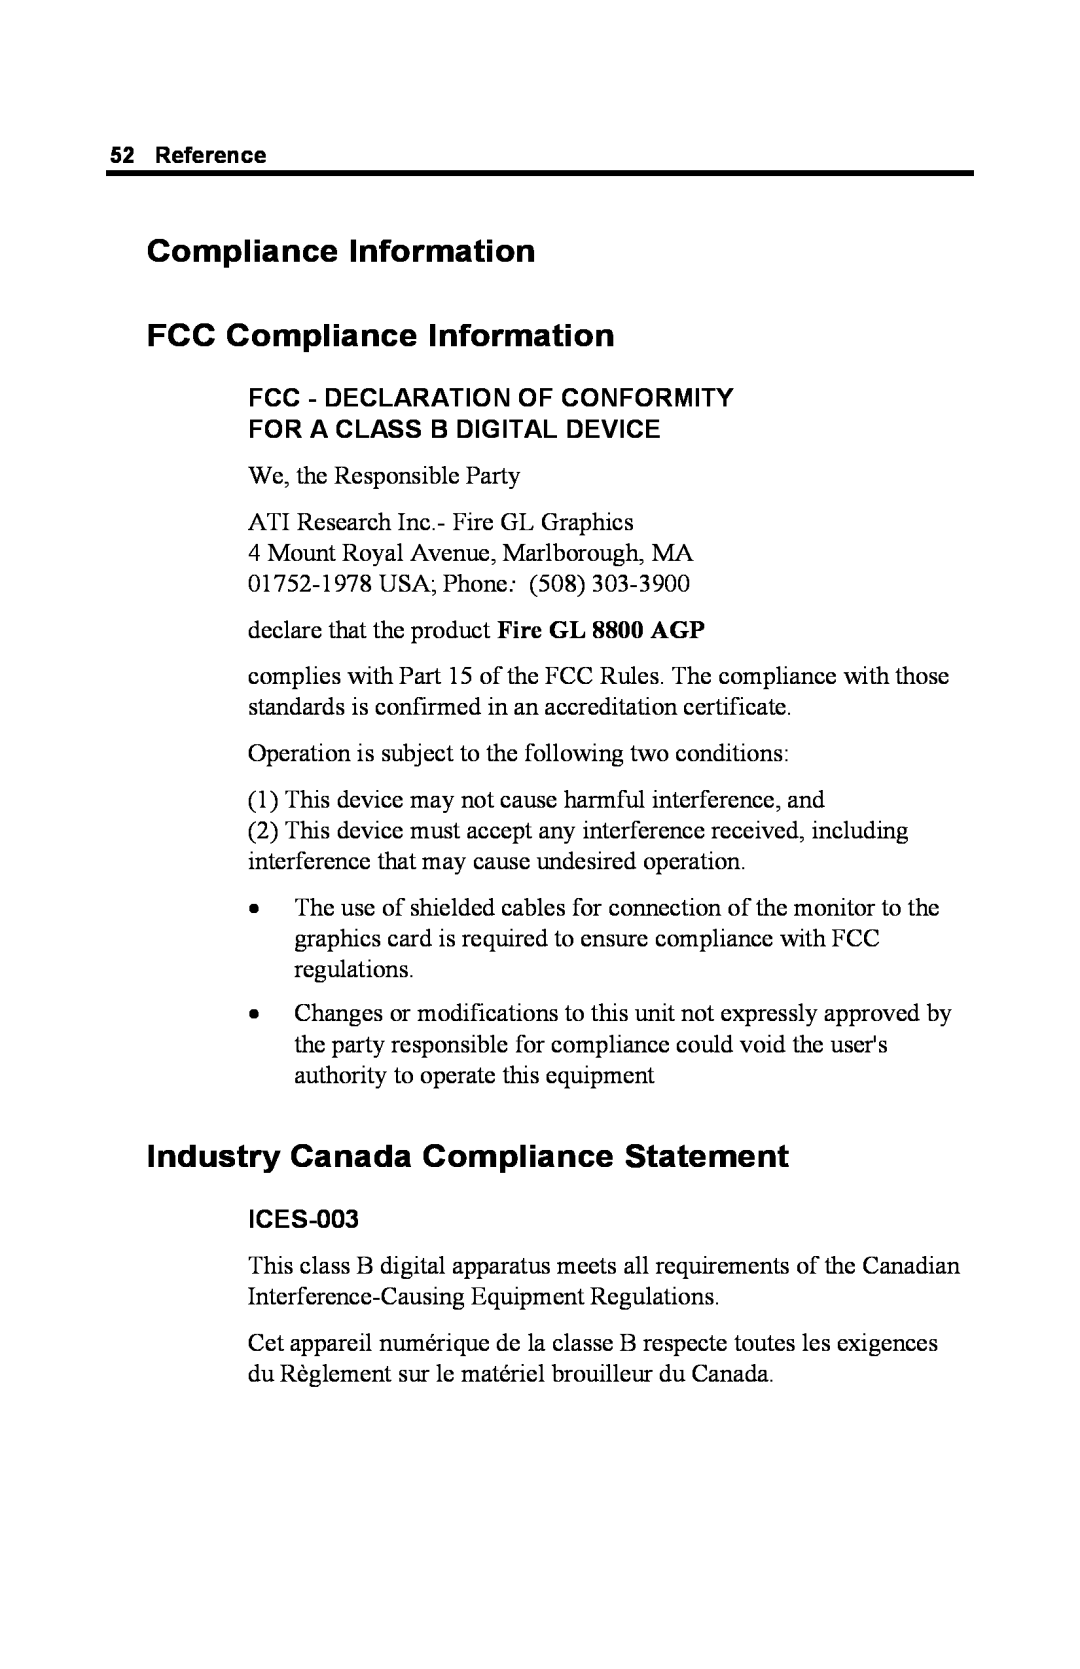 ATI Technologies GL 8800 Compliance Information FCC Compliance Information, Industry Canada Compliance Statement, ICES-003 